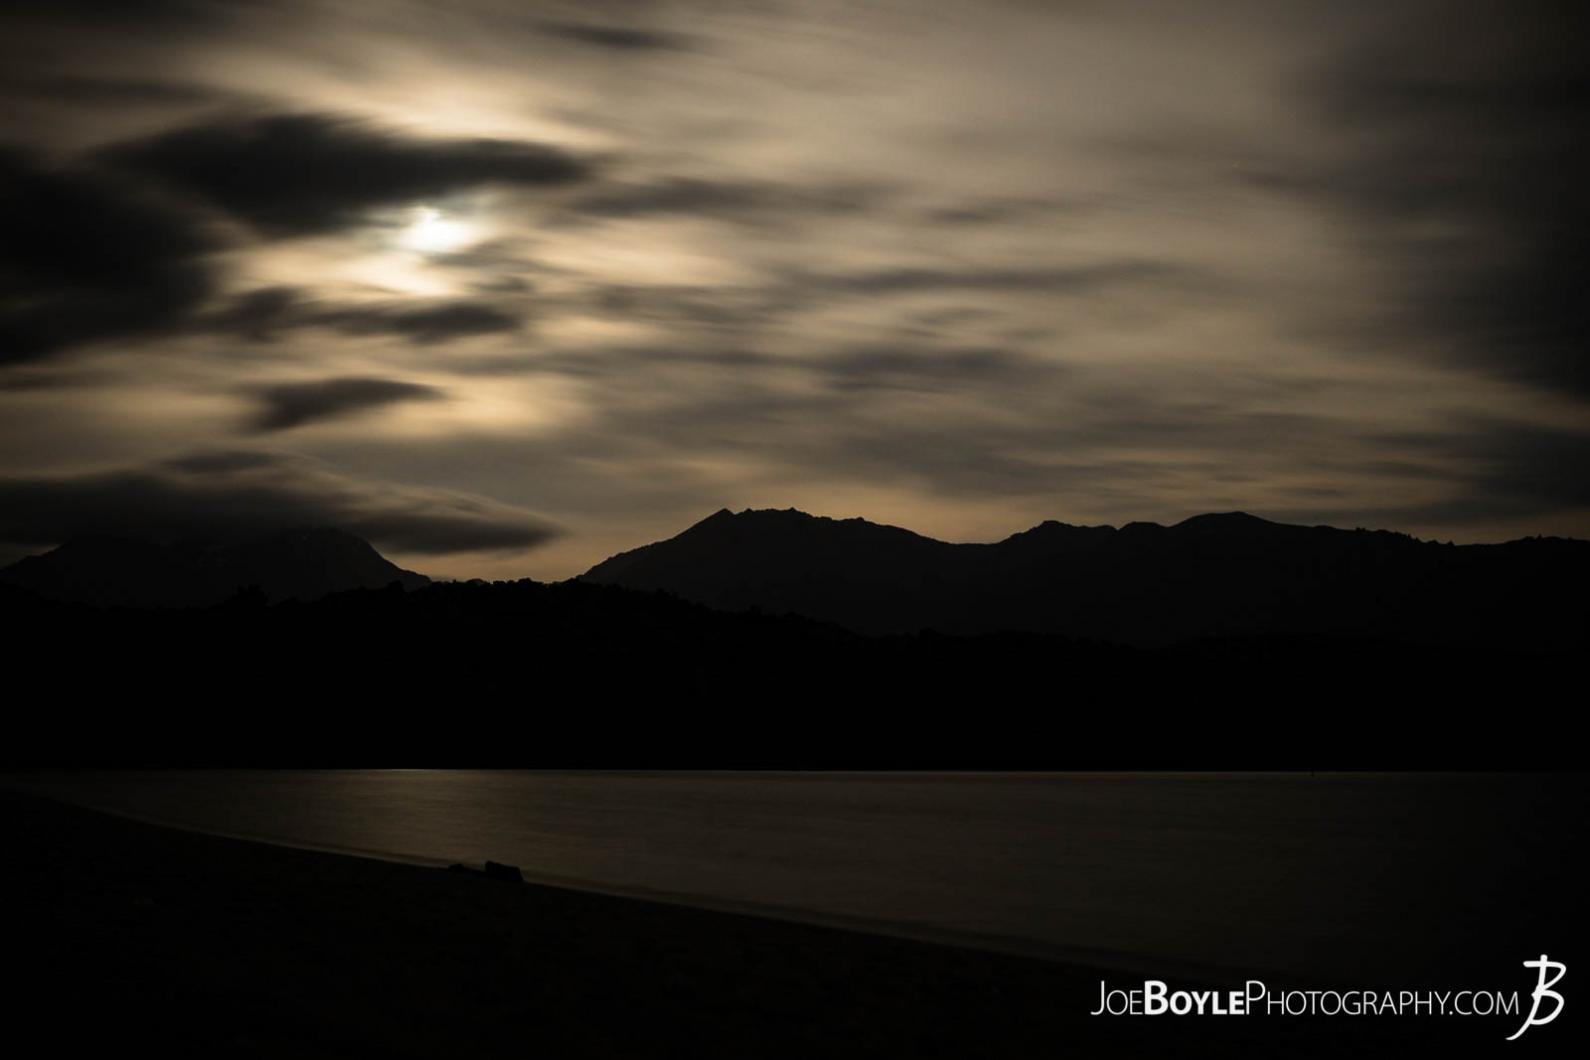 Here is a long exposure night-shot of the moon over the mountains with some cool clouds!